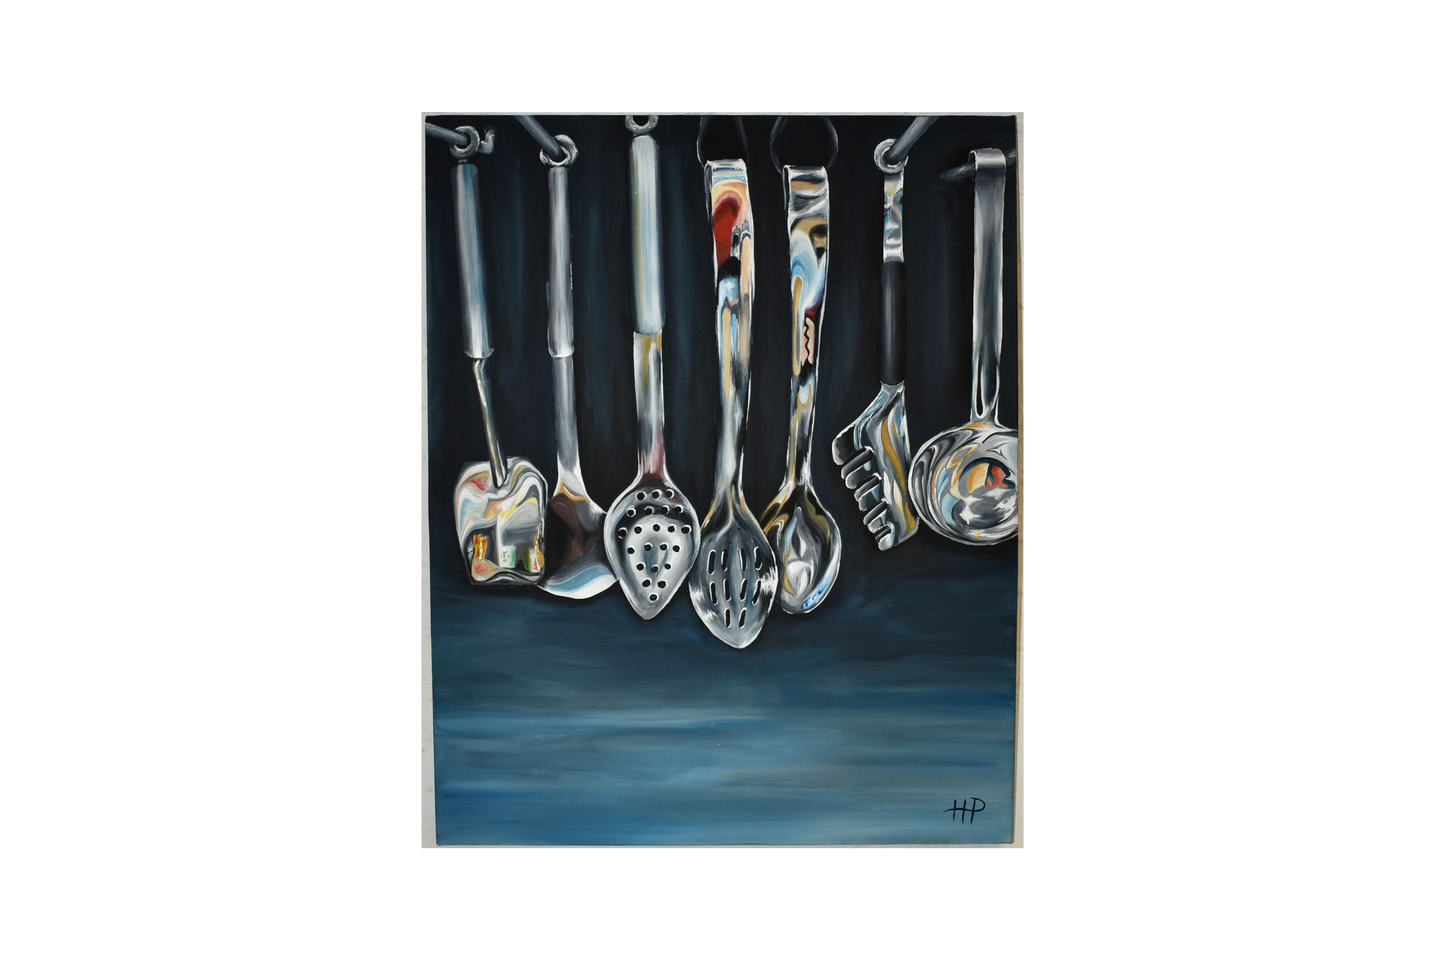 Painting of kitchen utensils hanging against a blue gradient background